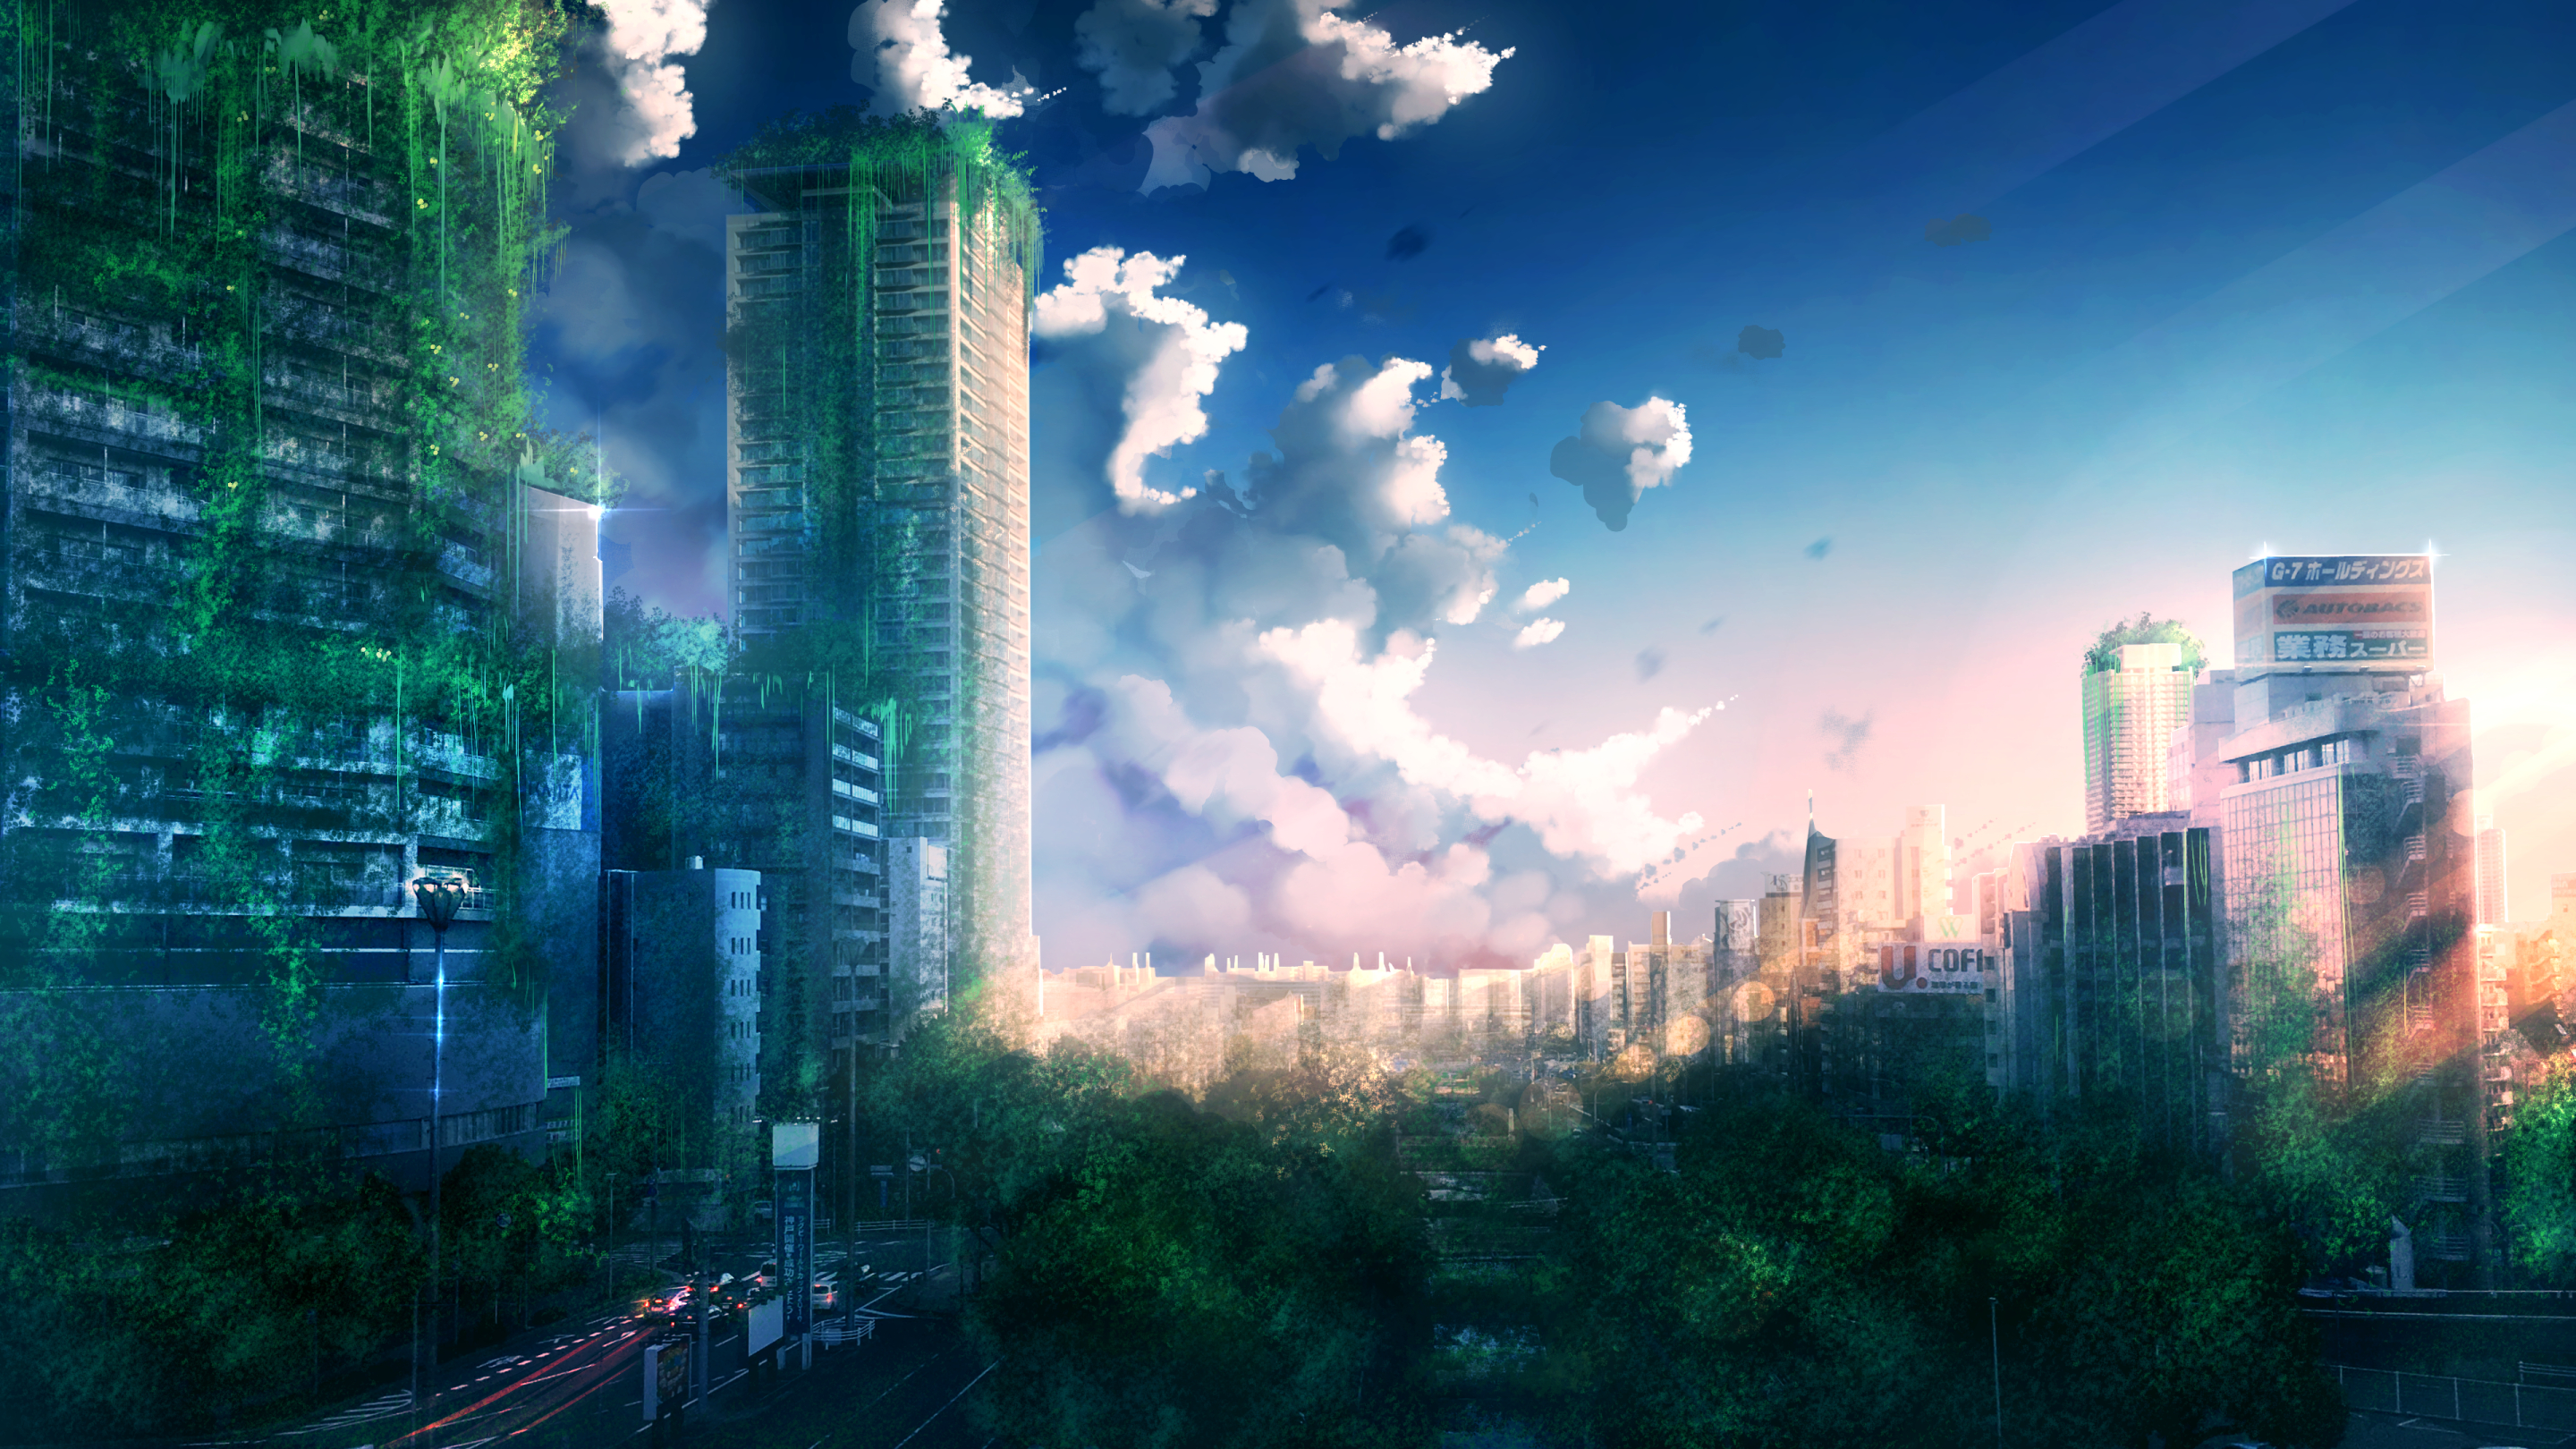 260+ Anime Landscape HD Wallpapers and Backgrounds, anime 1080p wallpaper 